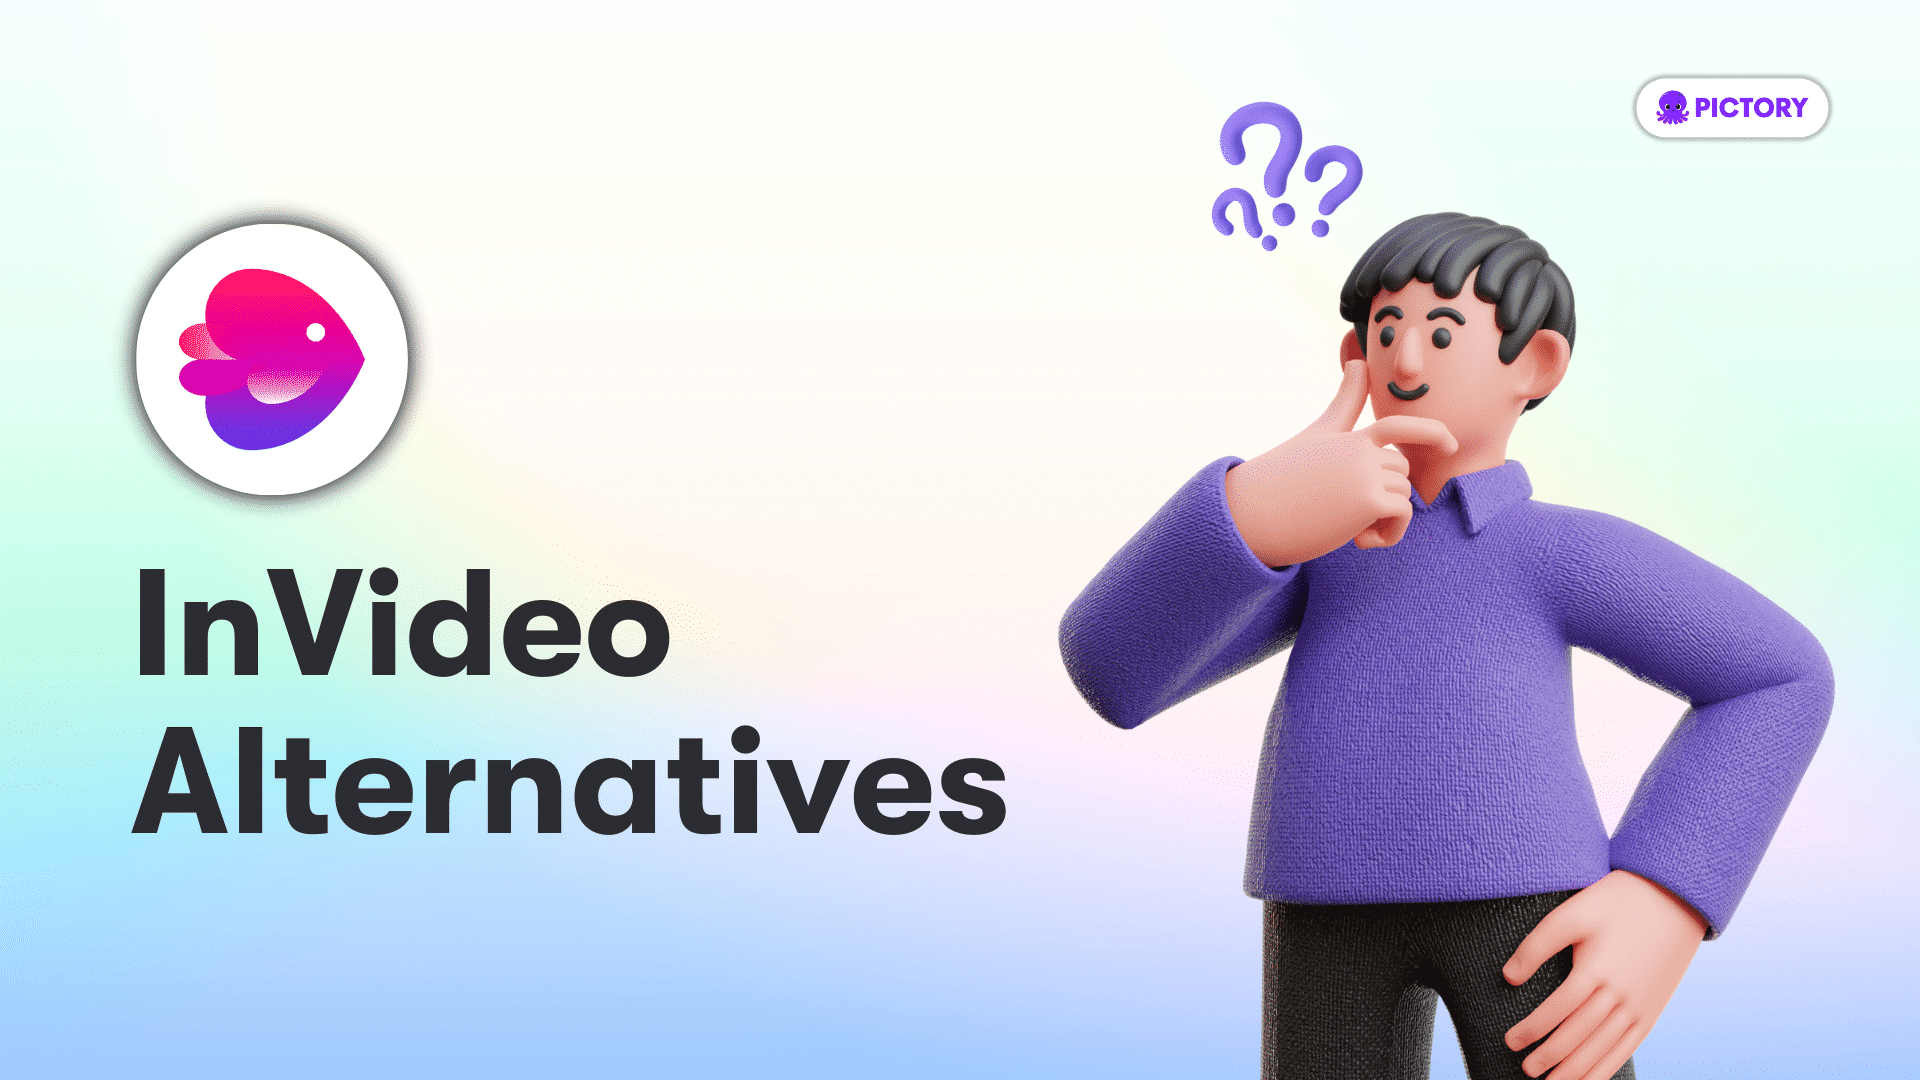 InVideo logo with the text 'invideo alternatives' and a cartoon man looking quizzical